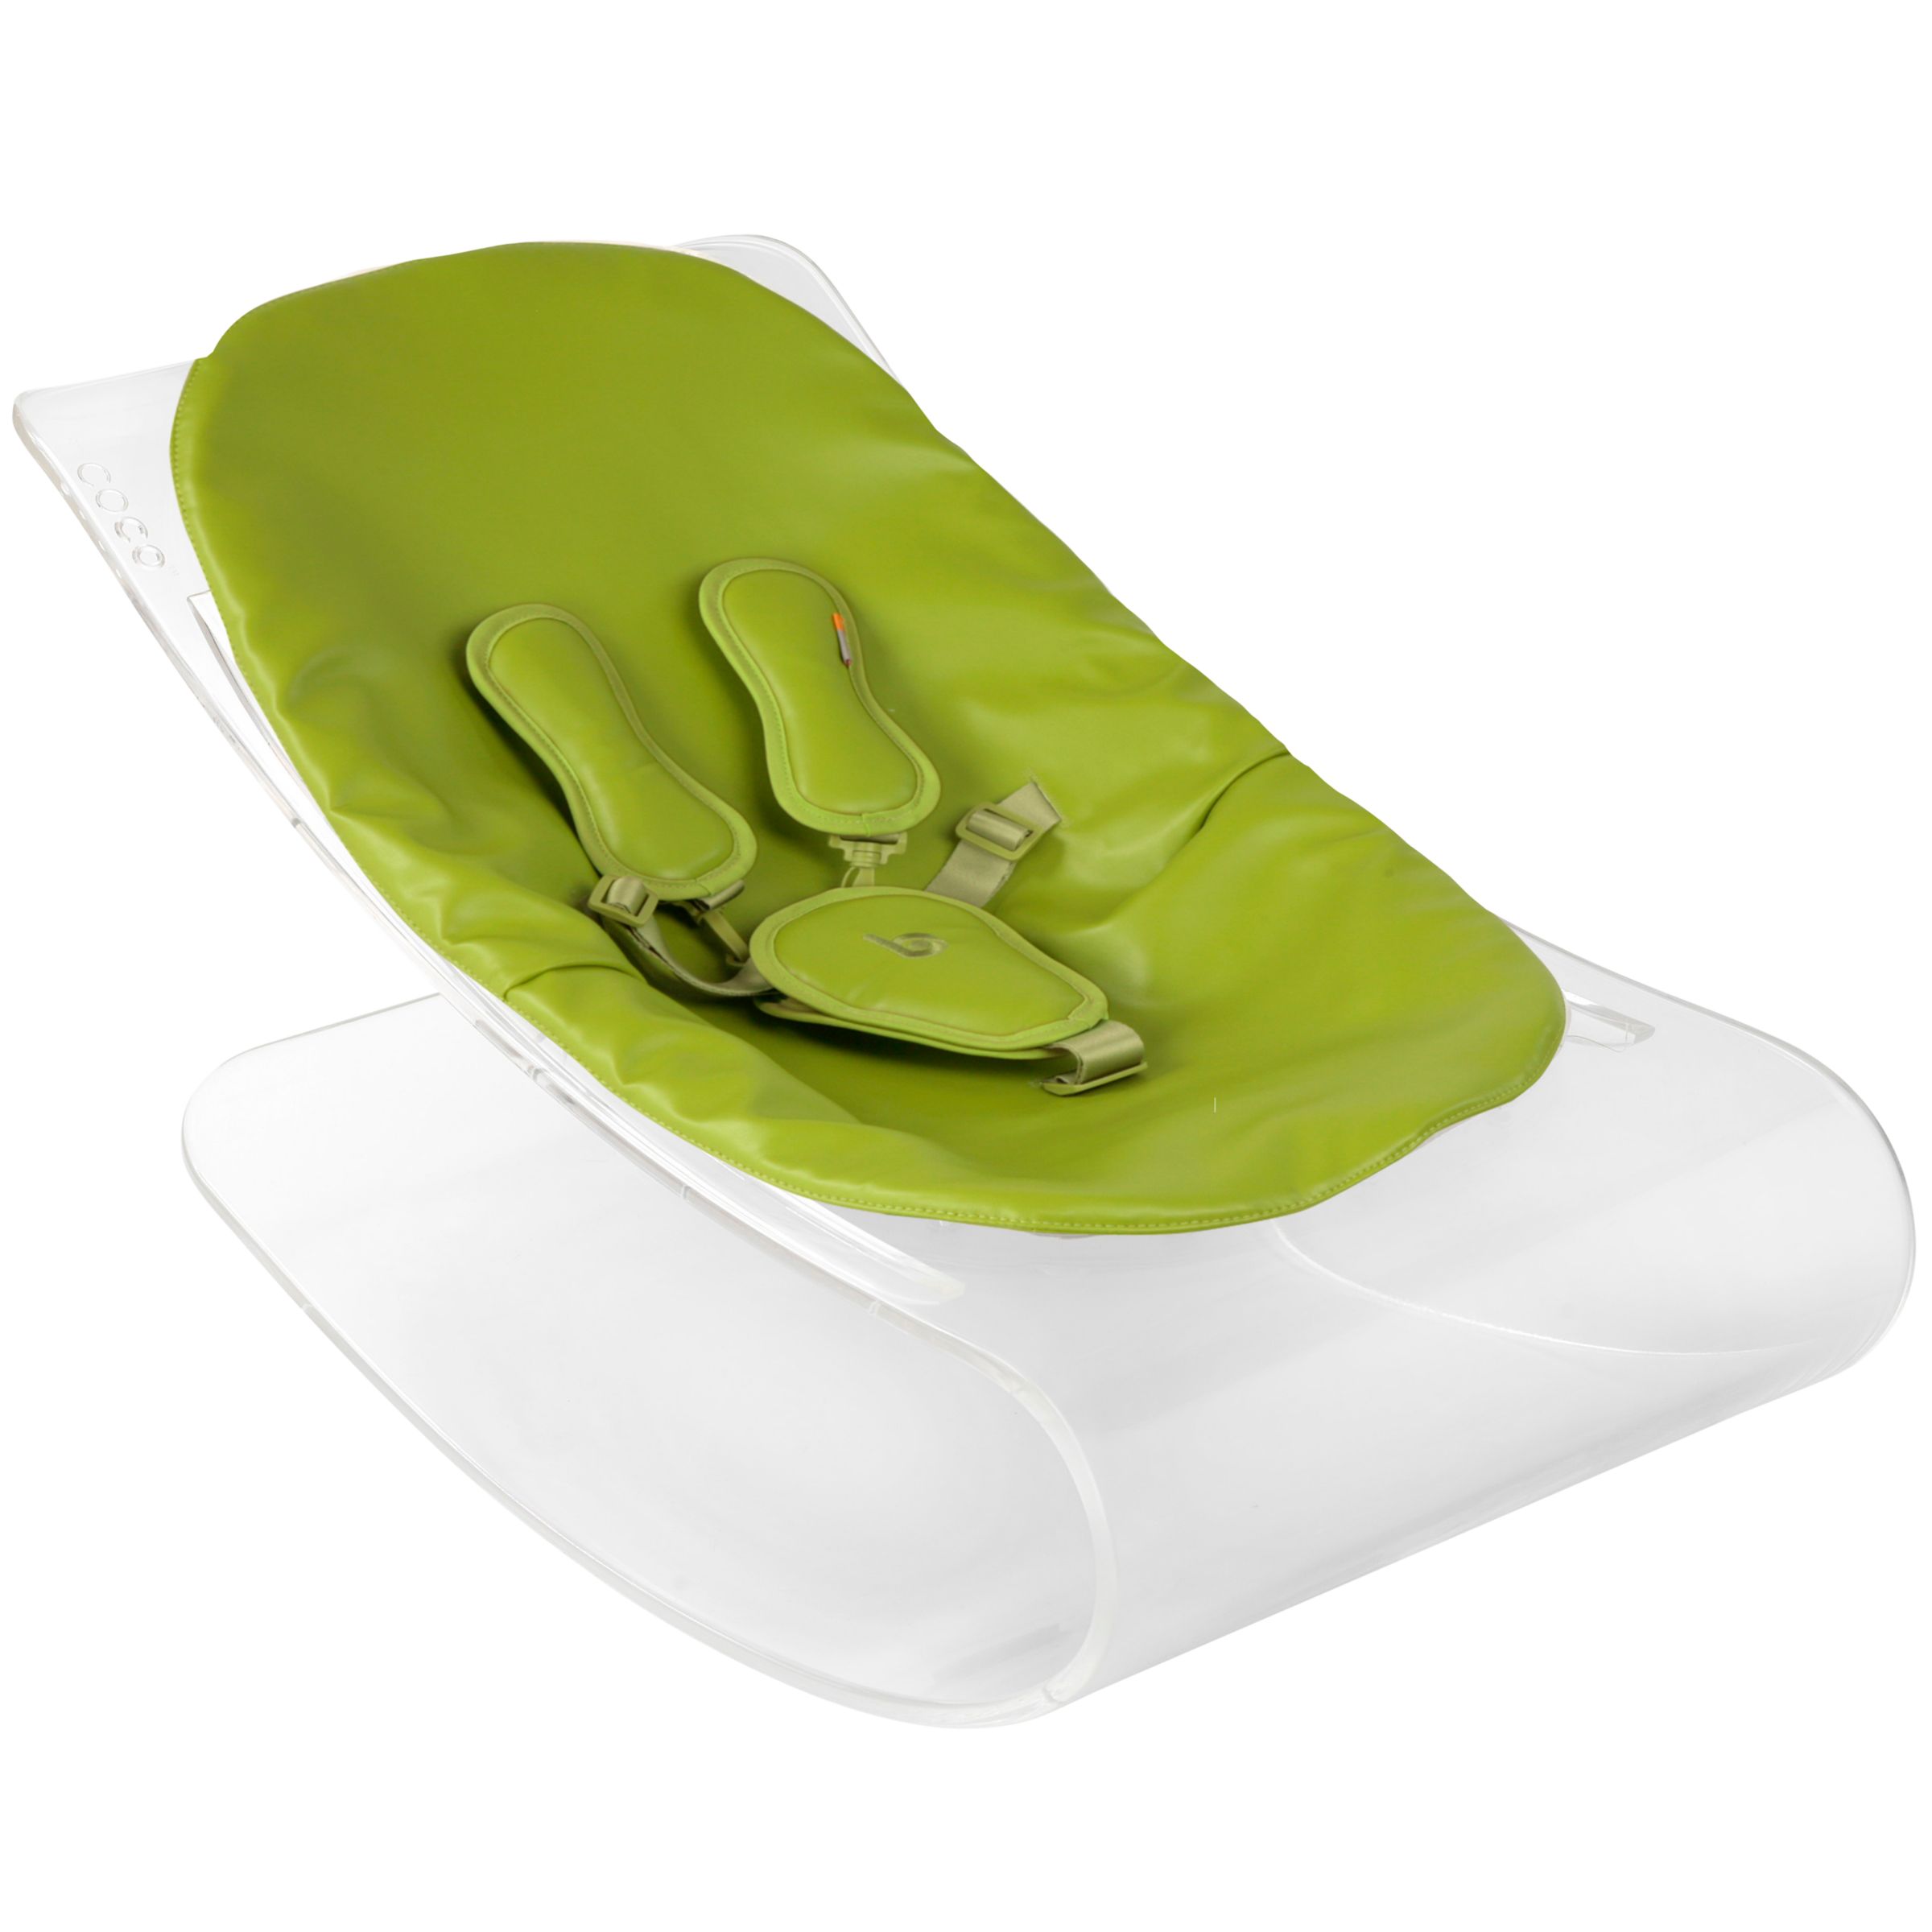 bloom Coco Plexistyle Baby Lounger, Transparent with Gala Green at John Lewis